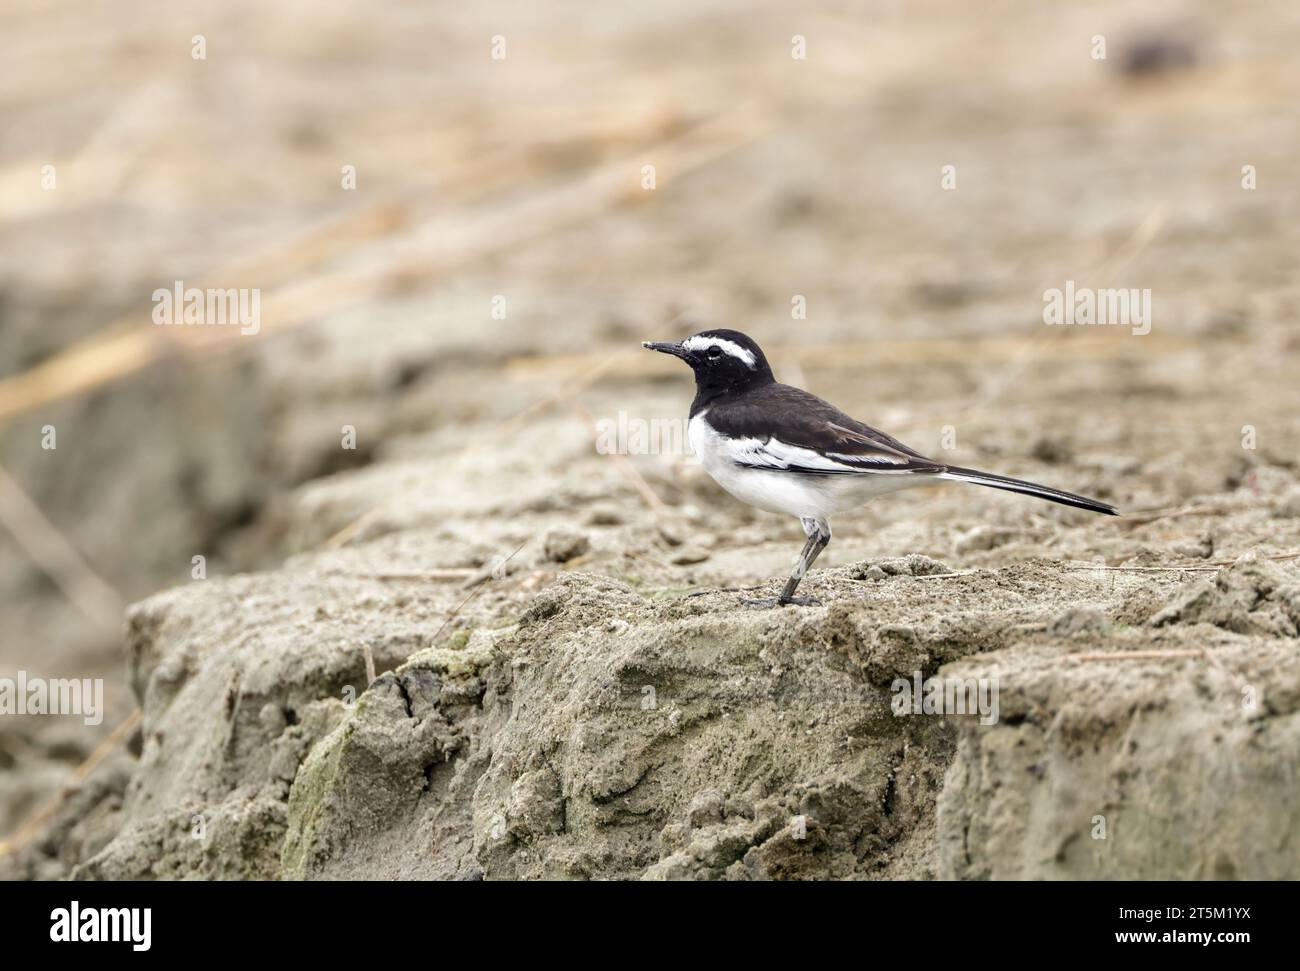 white-browed wagtail or large pied wagtail is a medium-sized bird and is the largest member of the wagtail family. Stock Photo